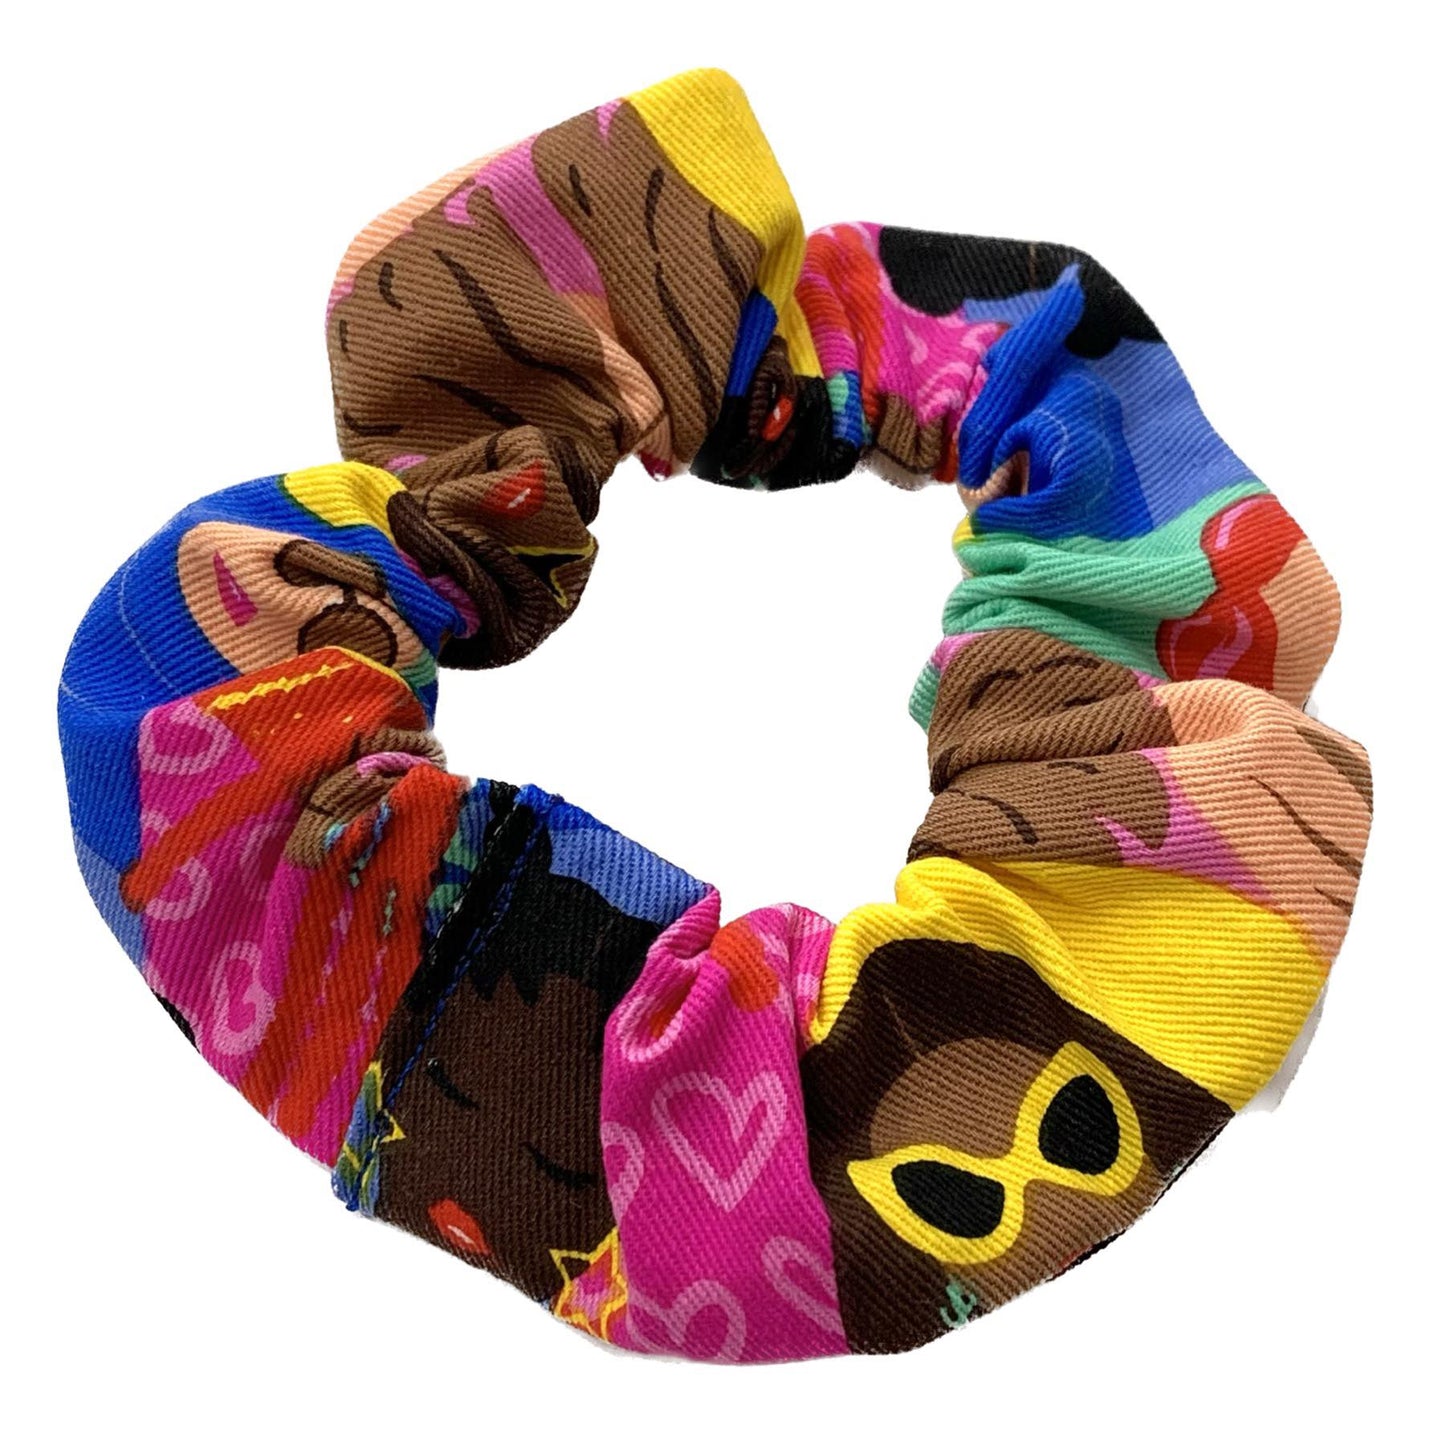 MAKIN' WHOOPEE - "Diverse Faces" REGULAR SCRUNCHIES